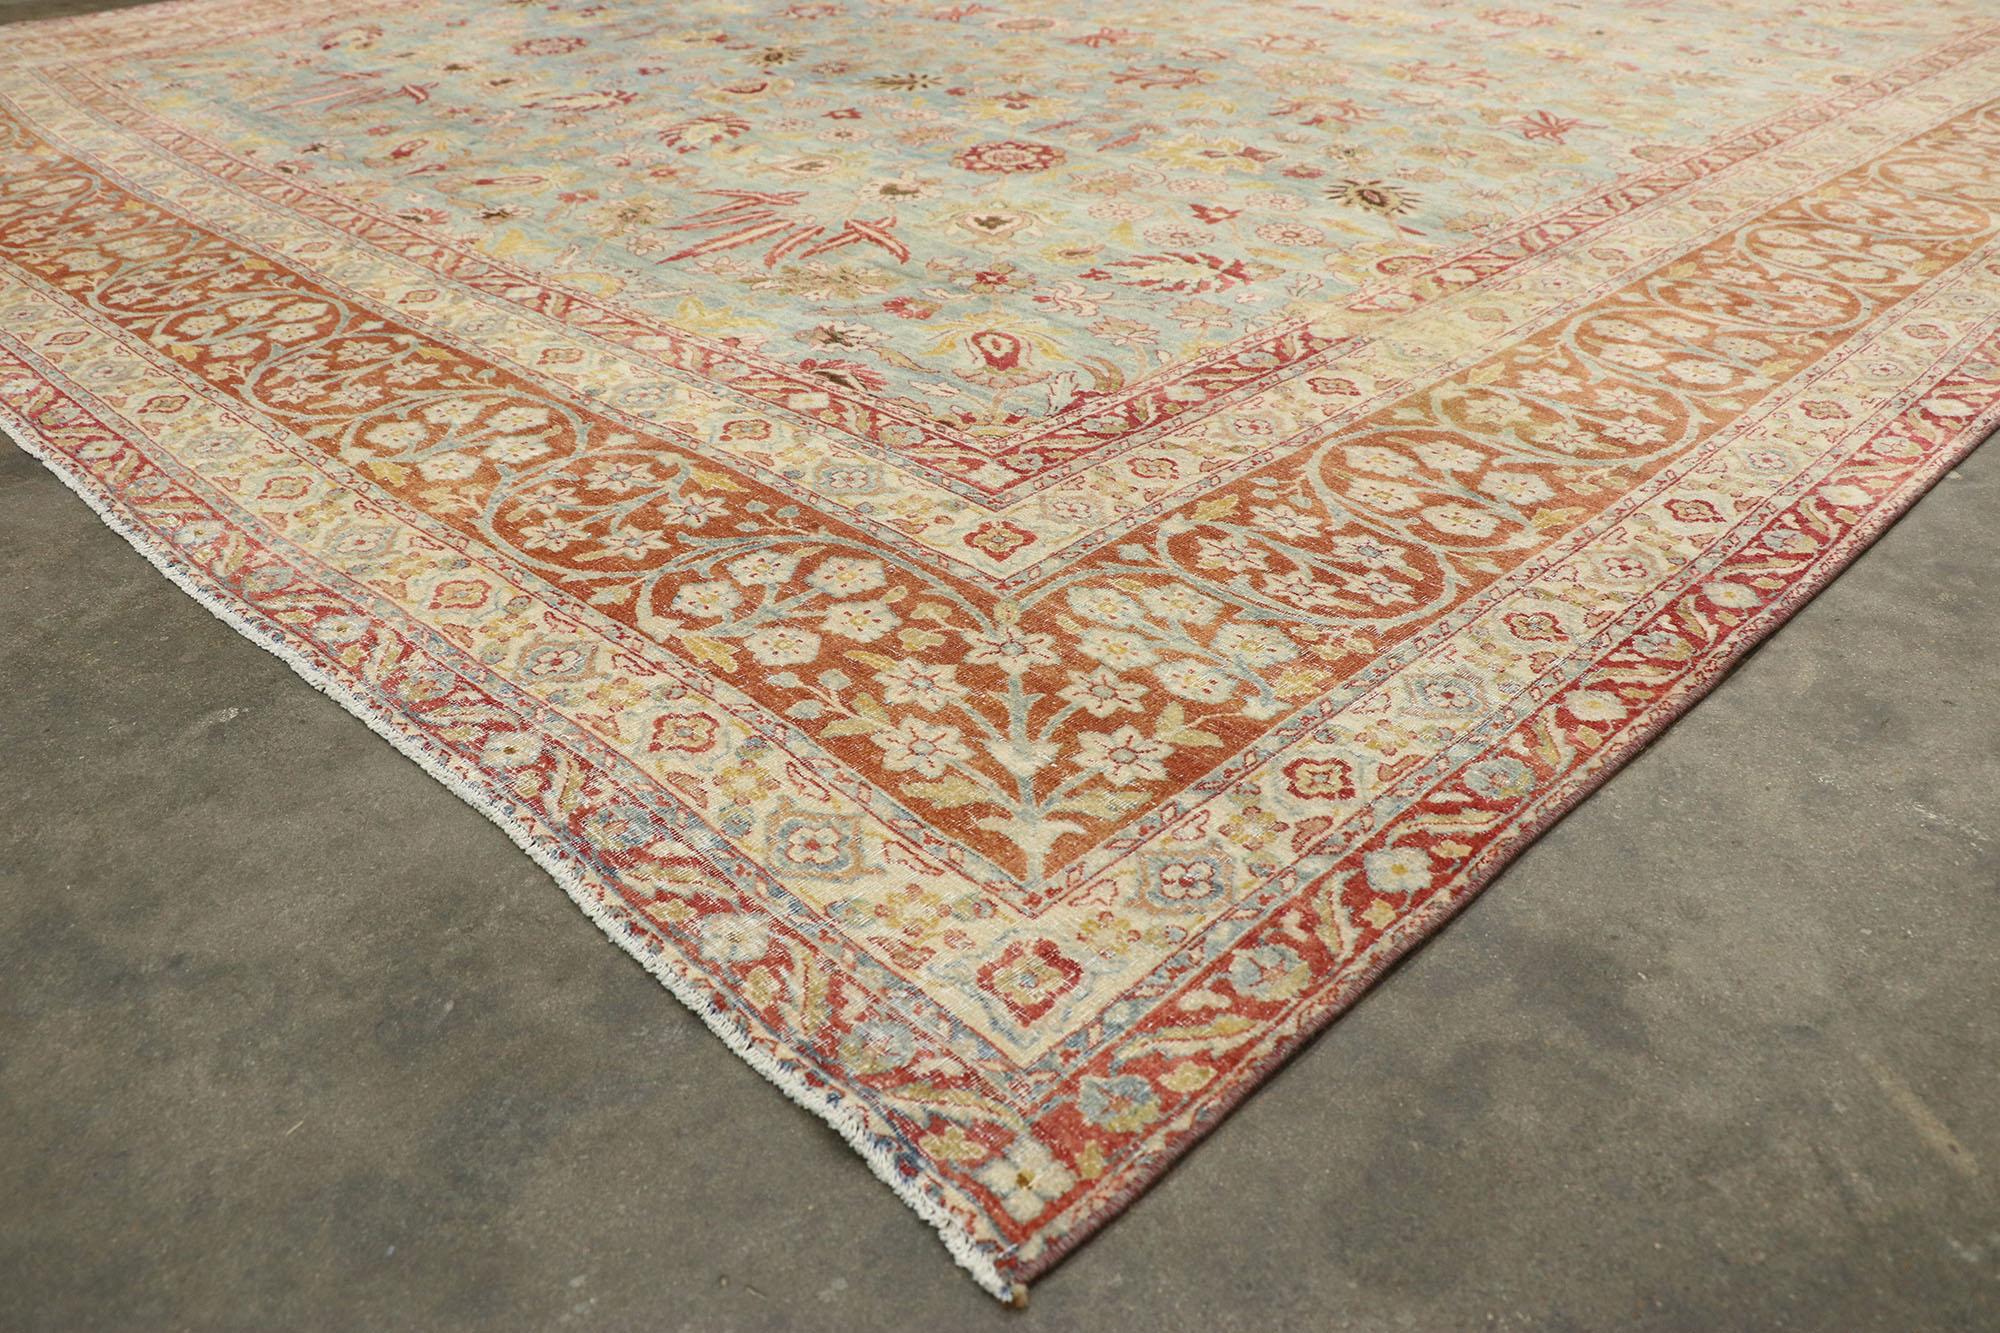 Hand-Knotted Distressed Antique Persian Kerman Rug with Southern Living and Colonial Style